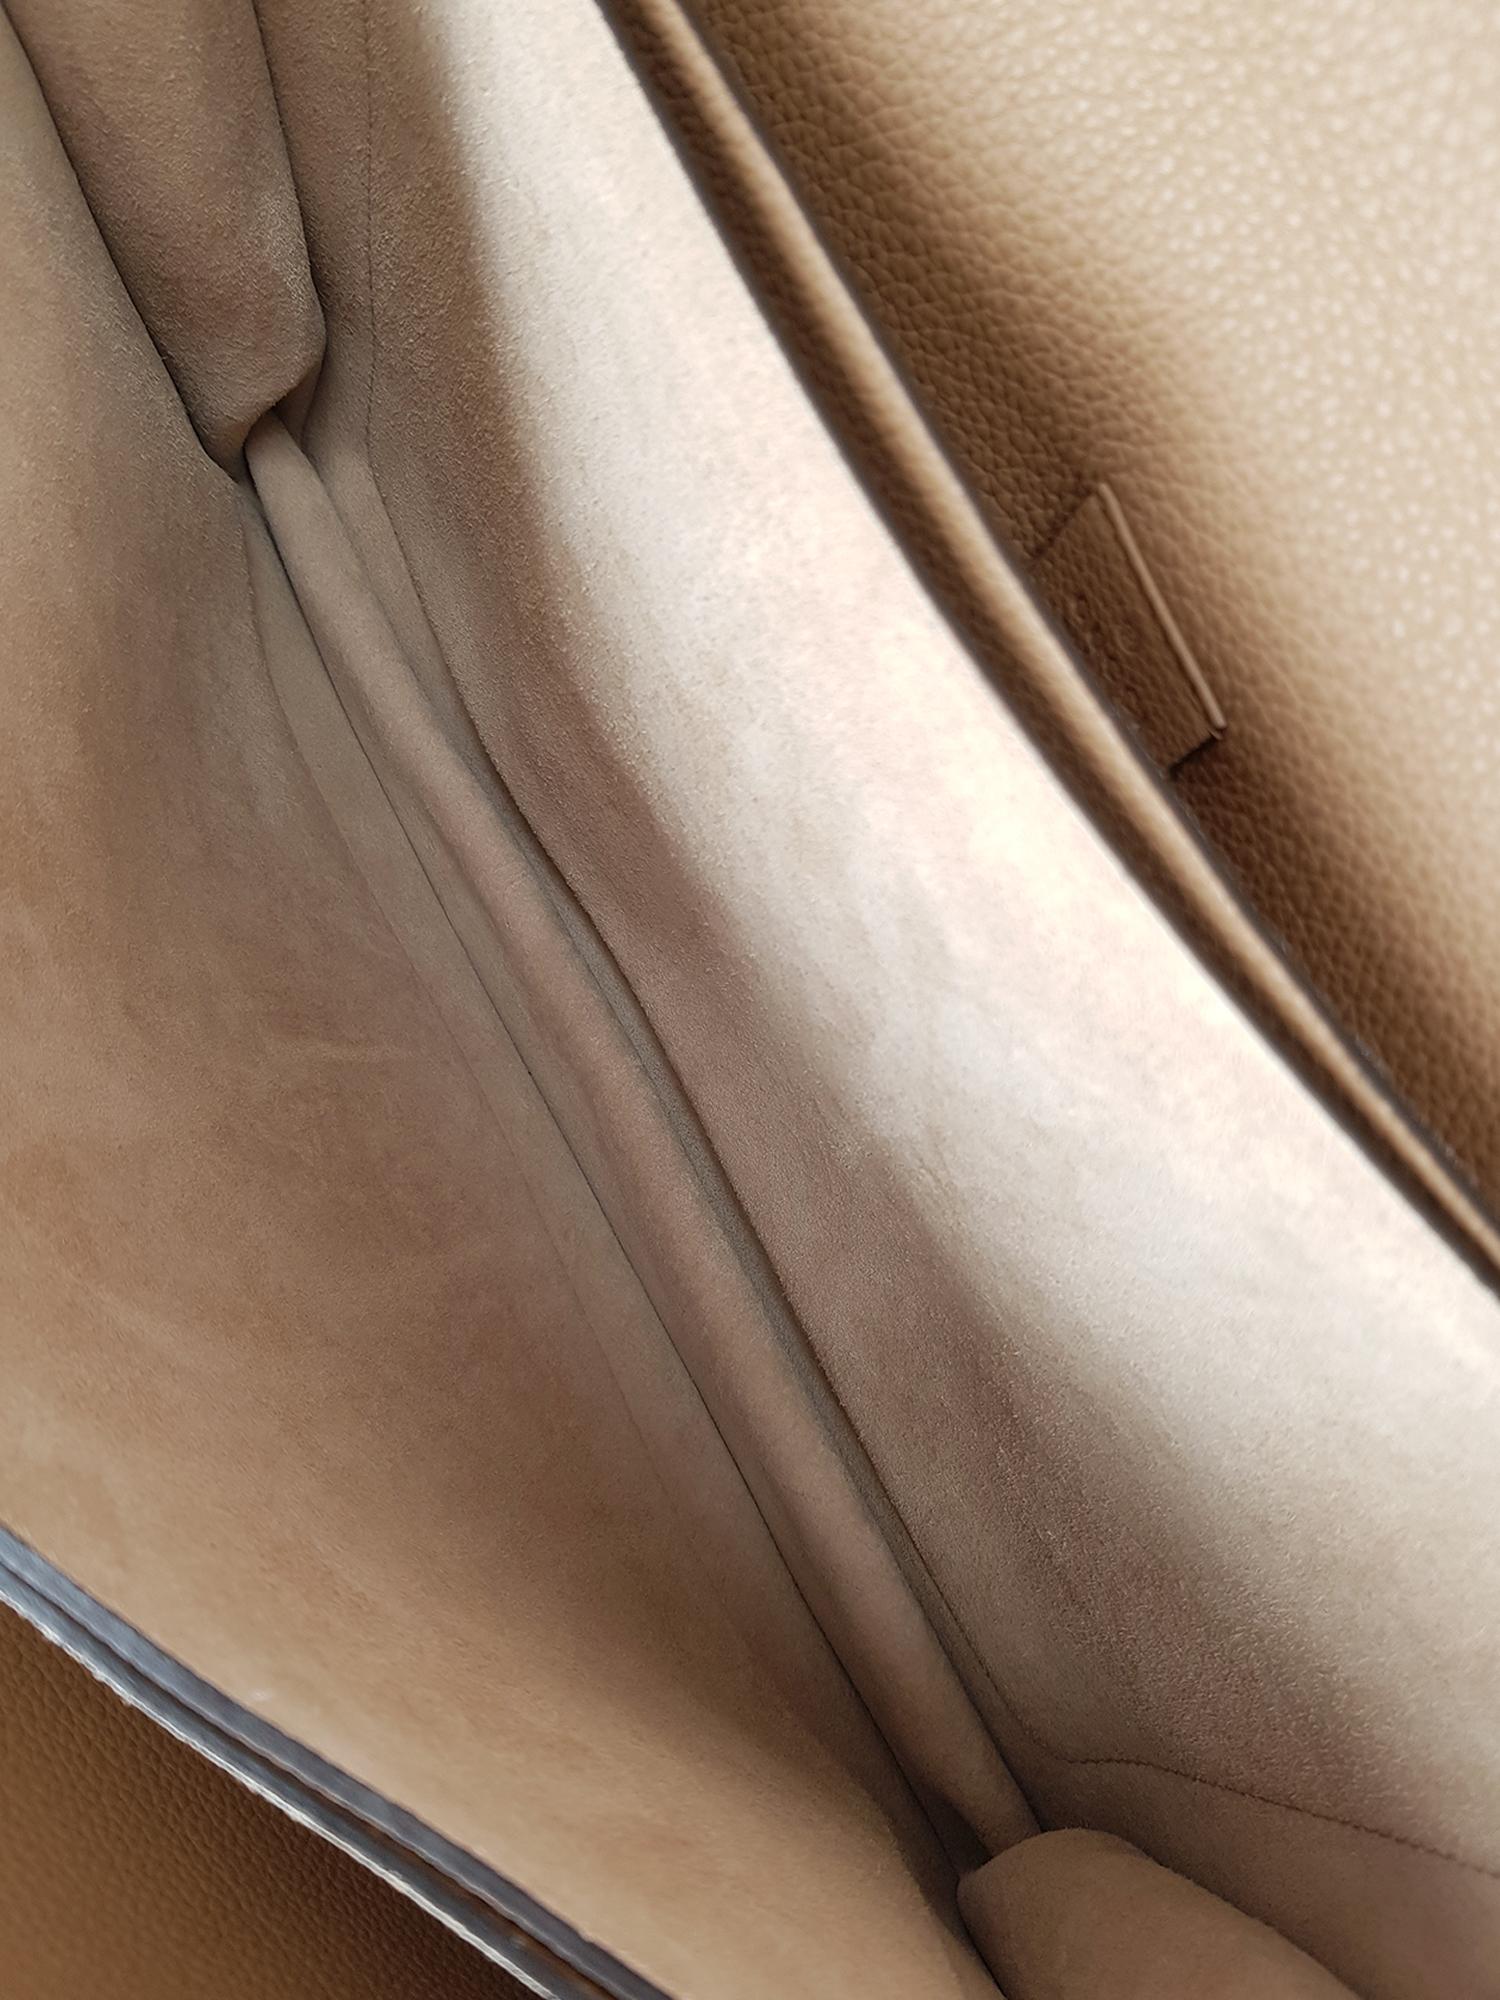 Gucci  Women   Briefcase Jackie Camel Color Leather  In Excellent Condition For Sale In Milan, IT